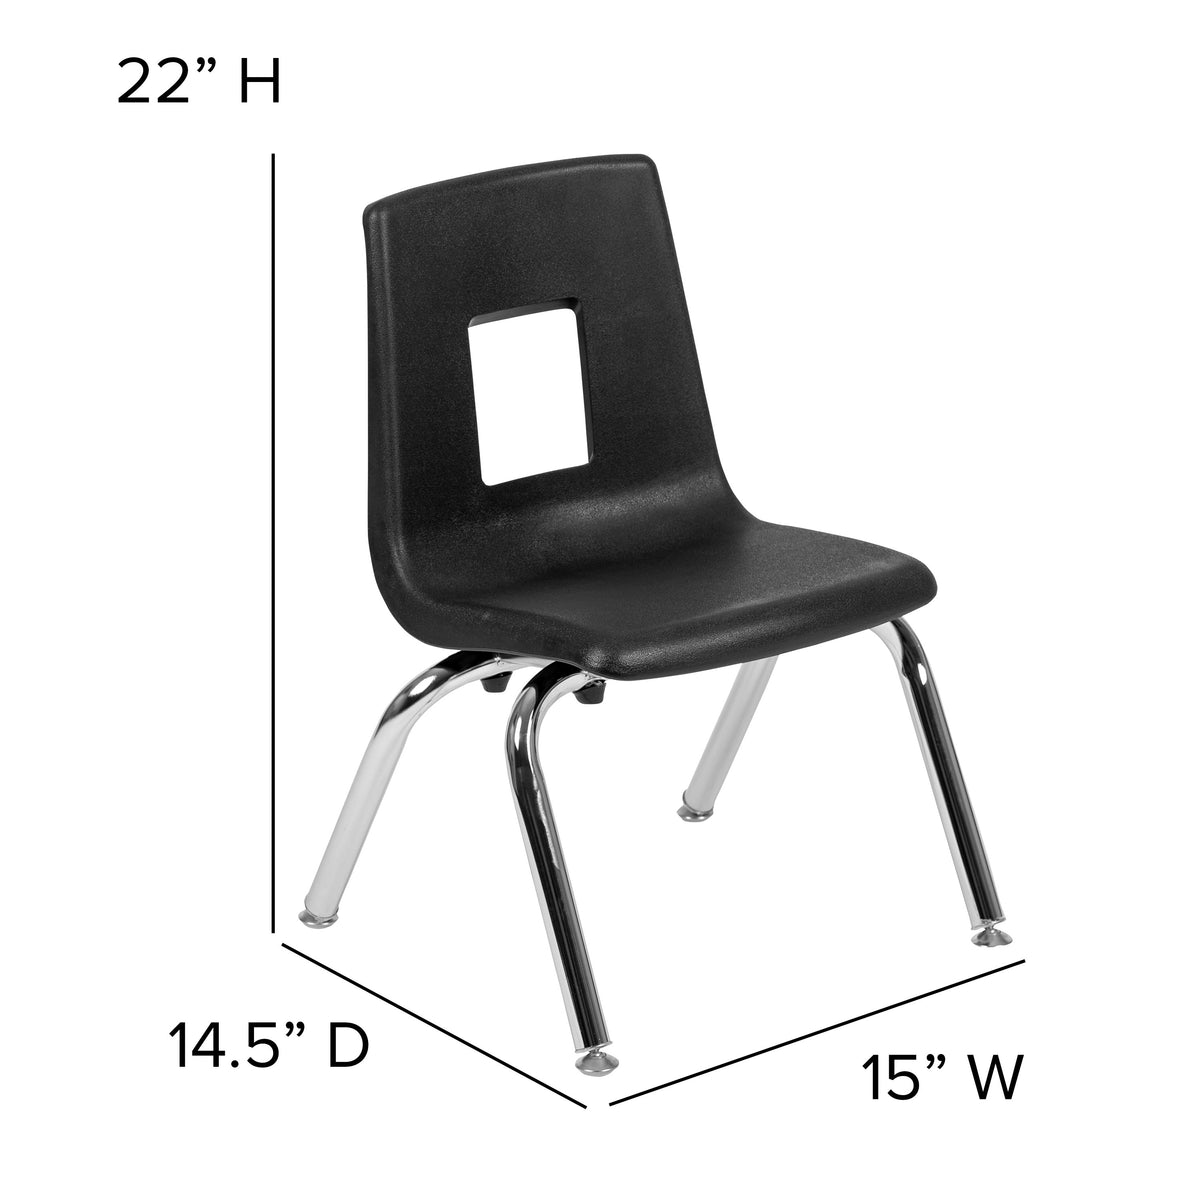 Grey |#| Mobile 60inch Circle Wave Activity Table Set-12inch Student Stack Chairs, Grey/Black